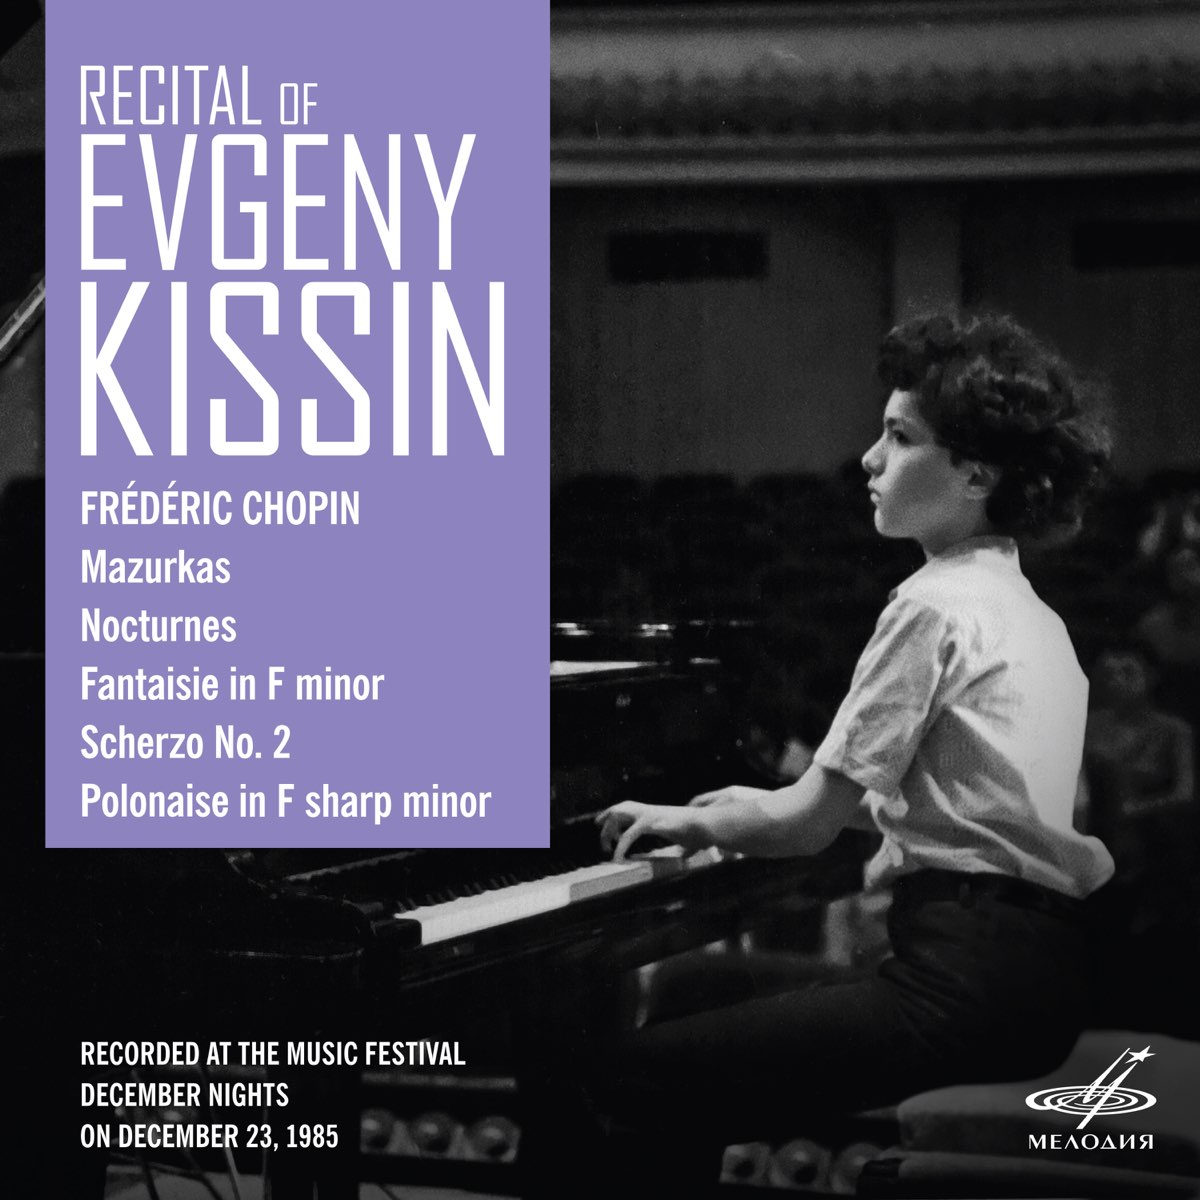 Recital of Evgeny Kissin. Moscow, December 23, 1985 (Live) by Evgeny Kissin  on Apple Music